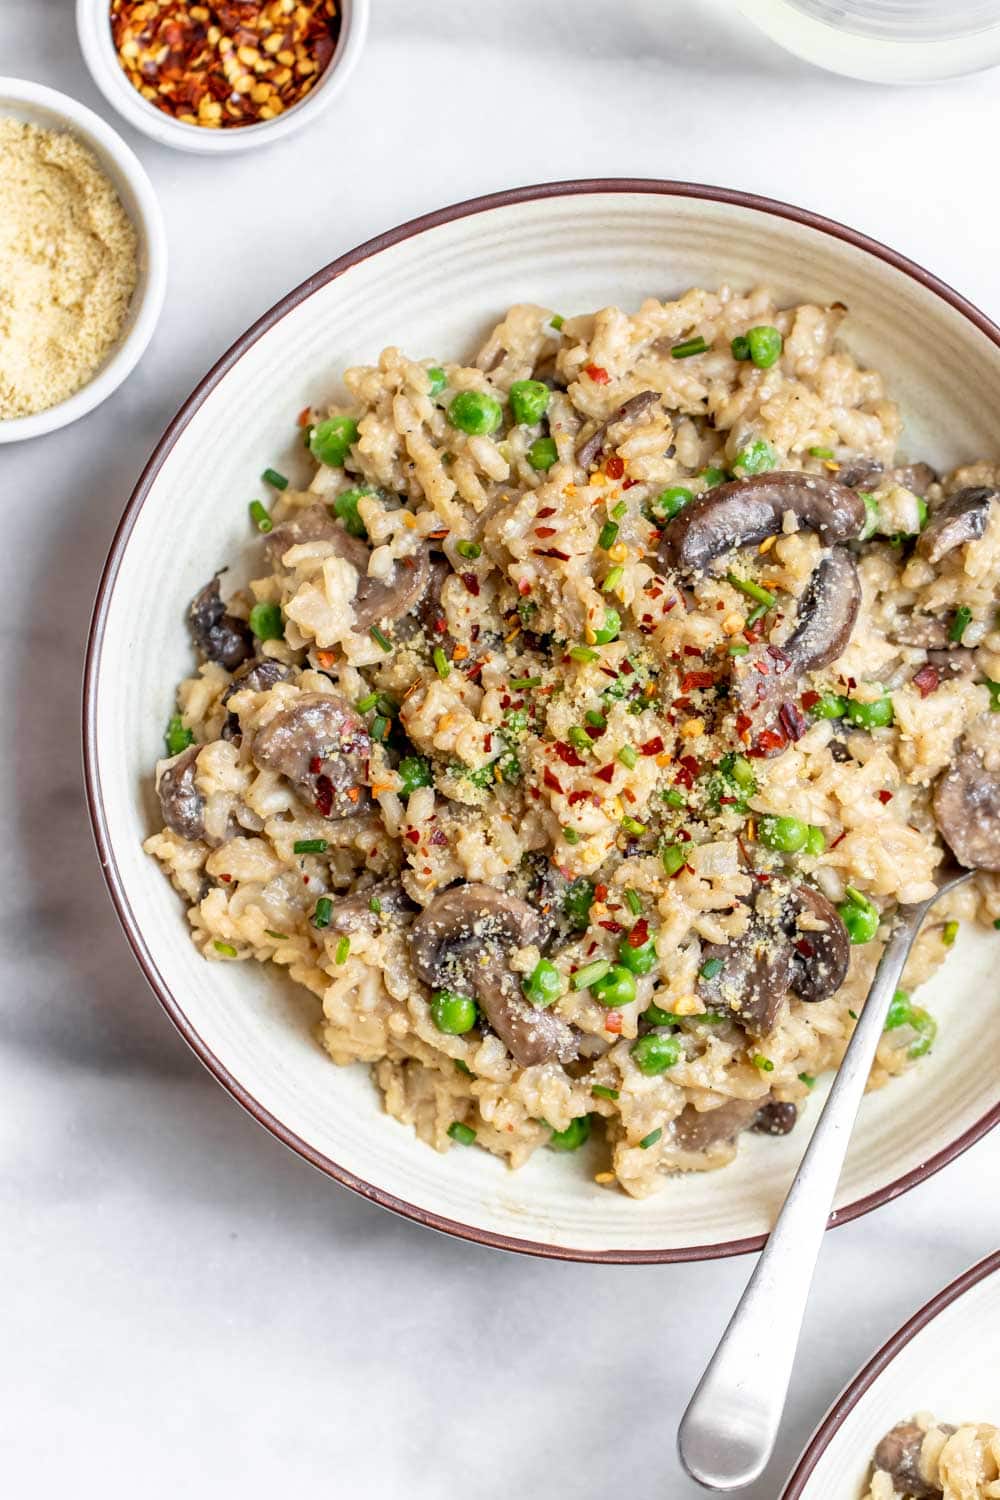 Overhead shot of risotto with mushrooms and peas.